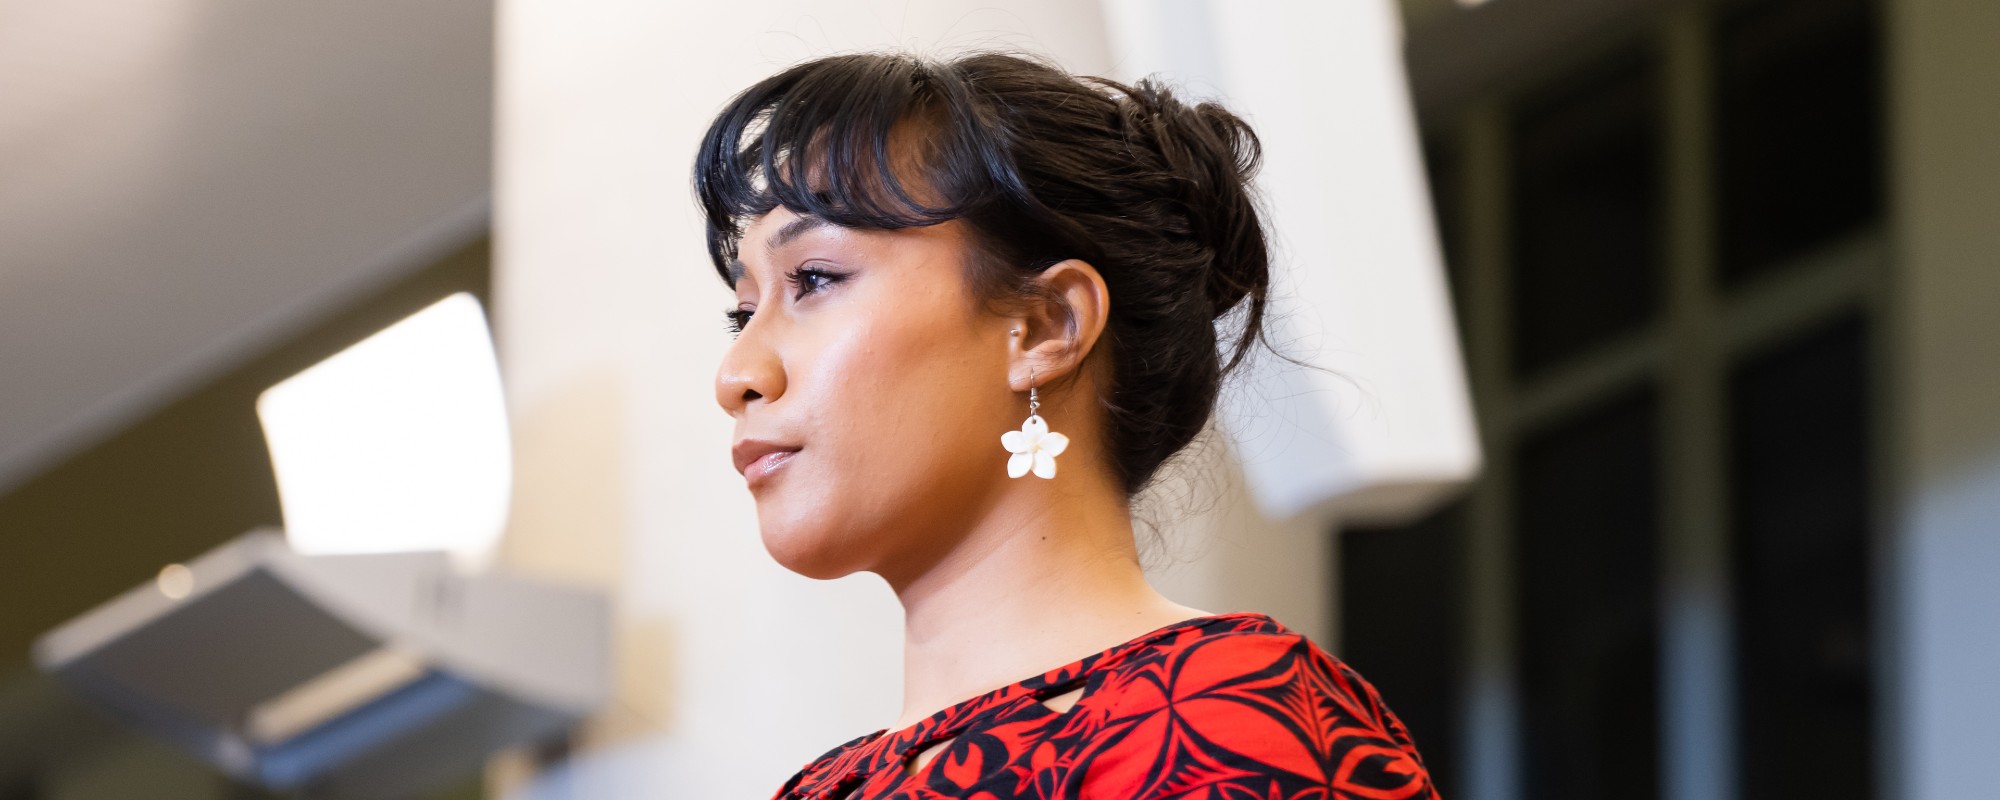 A profile photo of a student dressed in red, with a shiny silver flower earring.